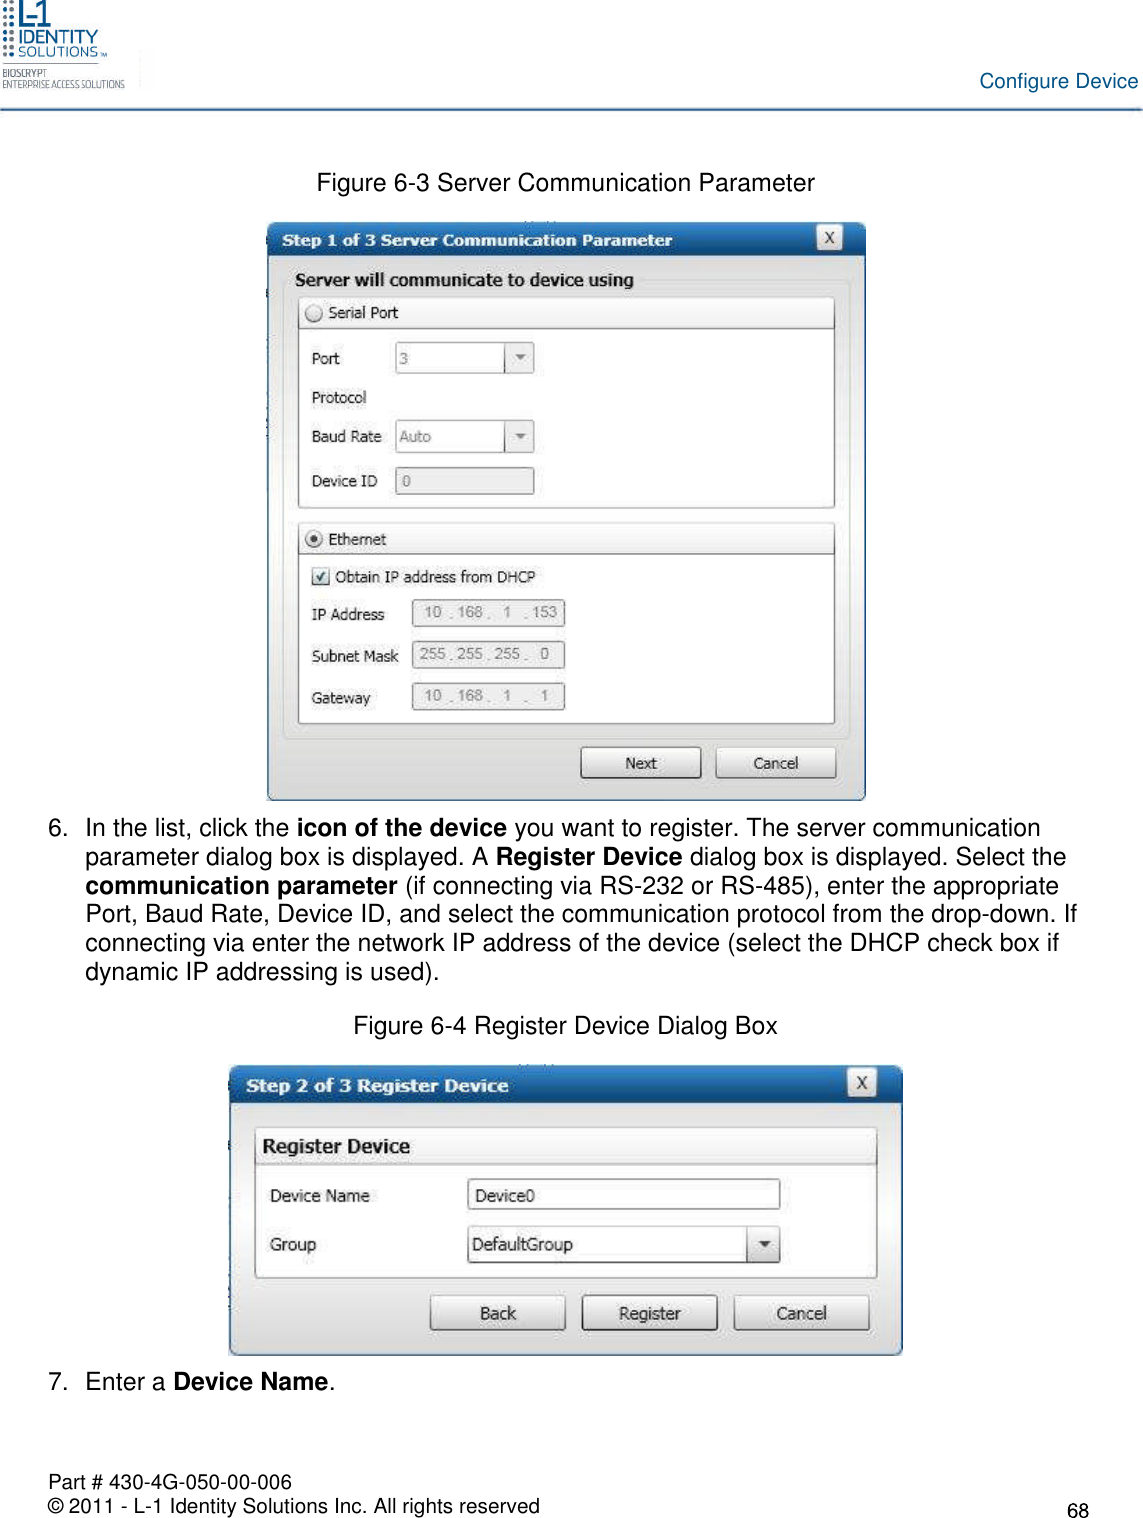 Part # 430-4G-050-00-006© 2011 - L-1 Identity Solutions Inc. All rights reservedConfigure DeviceFigure 6-3 Server Communication Parameter6. In the list, click the icon of the device you want to register. The server communicationparameter dialog box is displayed. A Register Device dialog box is displayed. Select thecommunication parameter (if connecting via RS-232 or RS-485), enter the appropriatePort, Baud Rate, Device ID, and select the communication protocol from the drop-down. Ifconnecting via enter the network IP address of the device (select the DHCP check box ifdynamic IP addressing is used).Figure 6-4 Register Device Dialog Box7. Enter a Device Name.